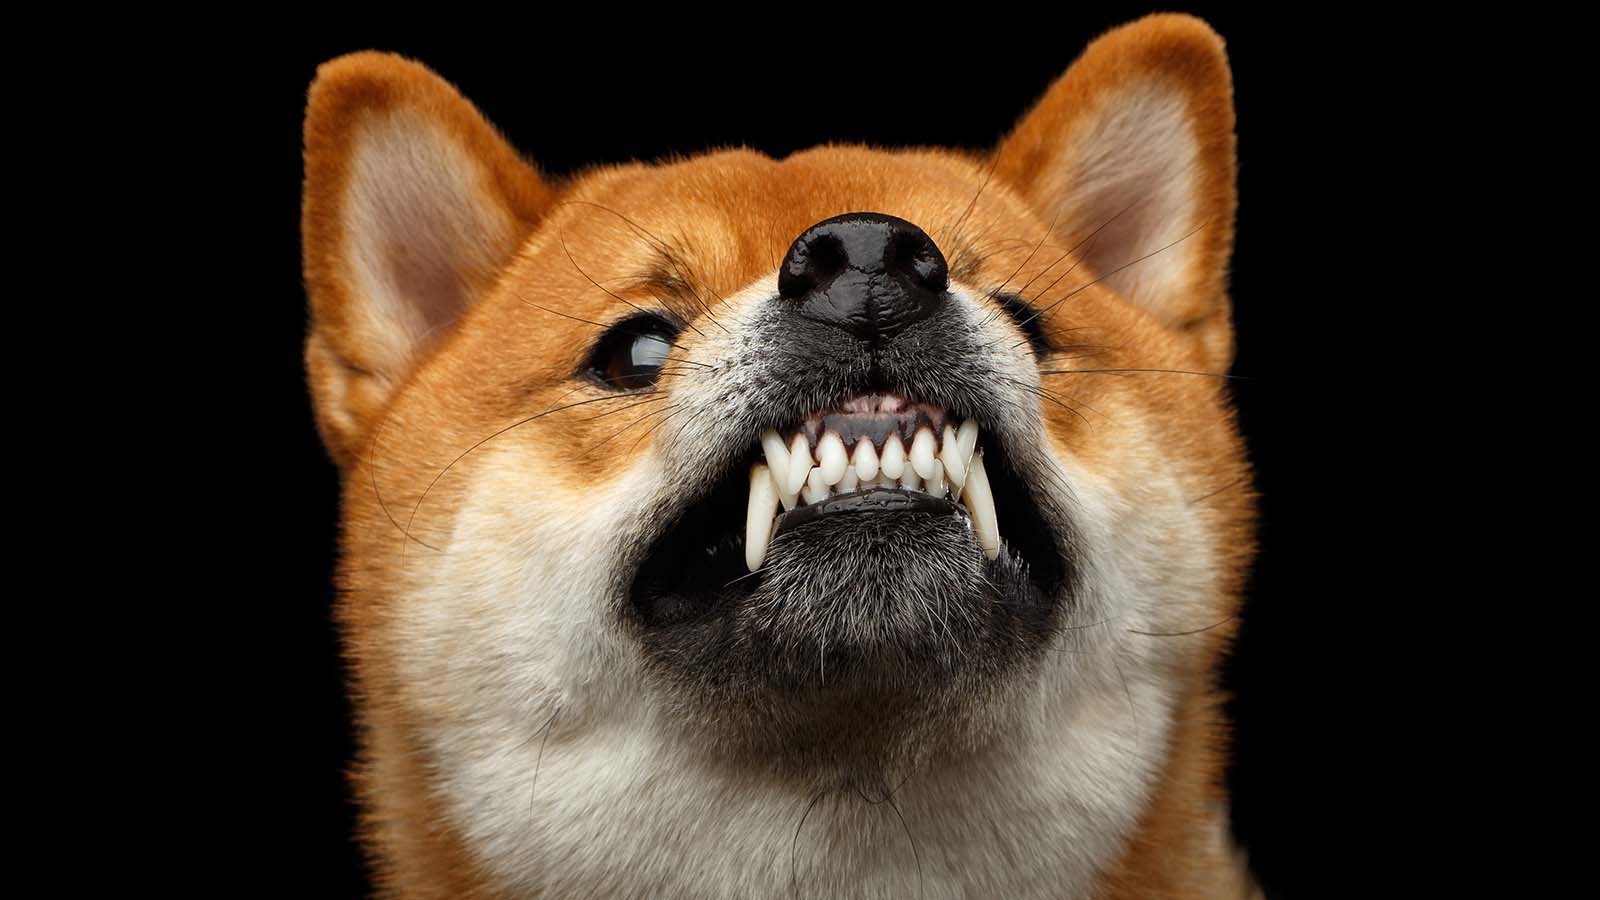 Now Whales showing significant inclination toward Shiba Inu Token 8